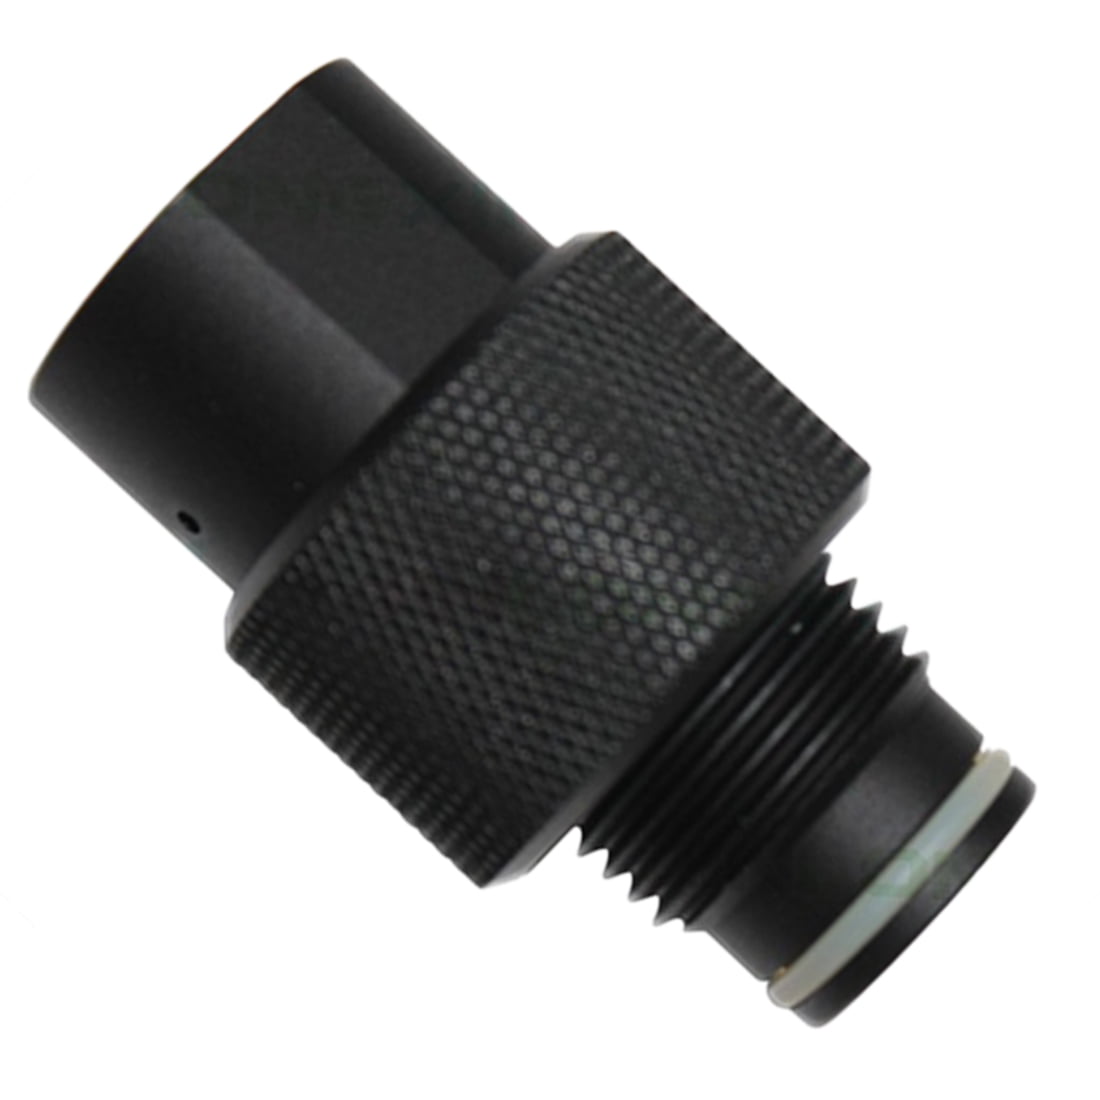 Details about   Black Hpat Paintball Air Adapter Inline Air Adapter With On And Off Valve Metal 